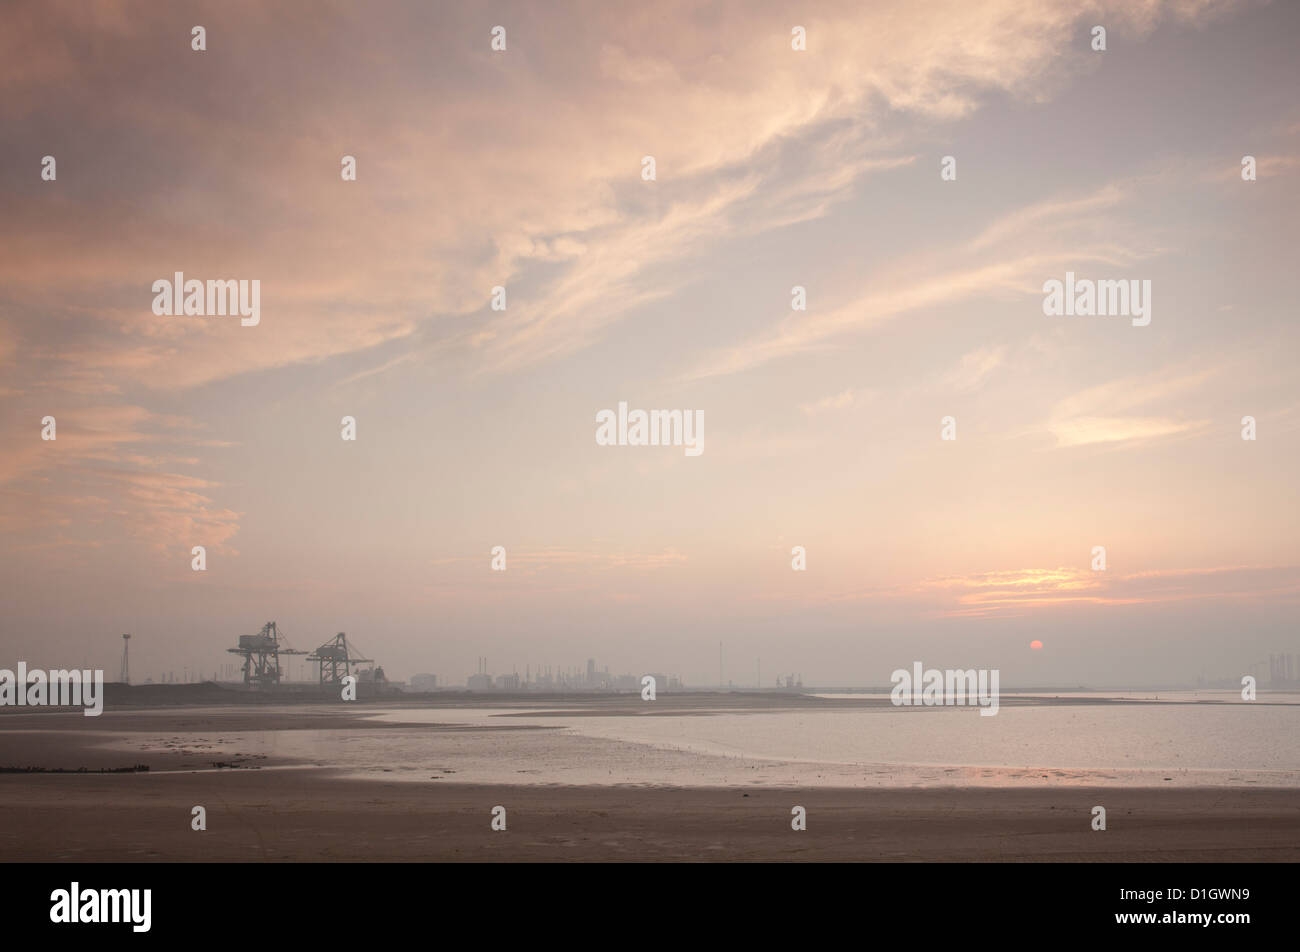 Teesside heavy industry seen from the South Gare of the River Tees at sunset. Stock Photo